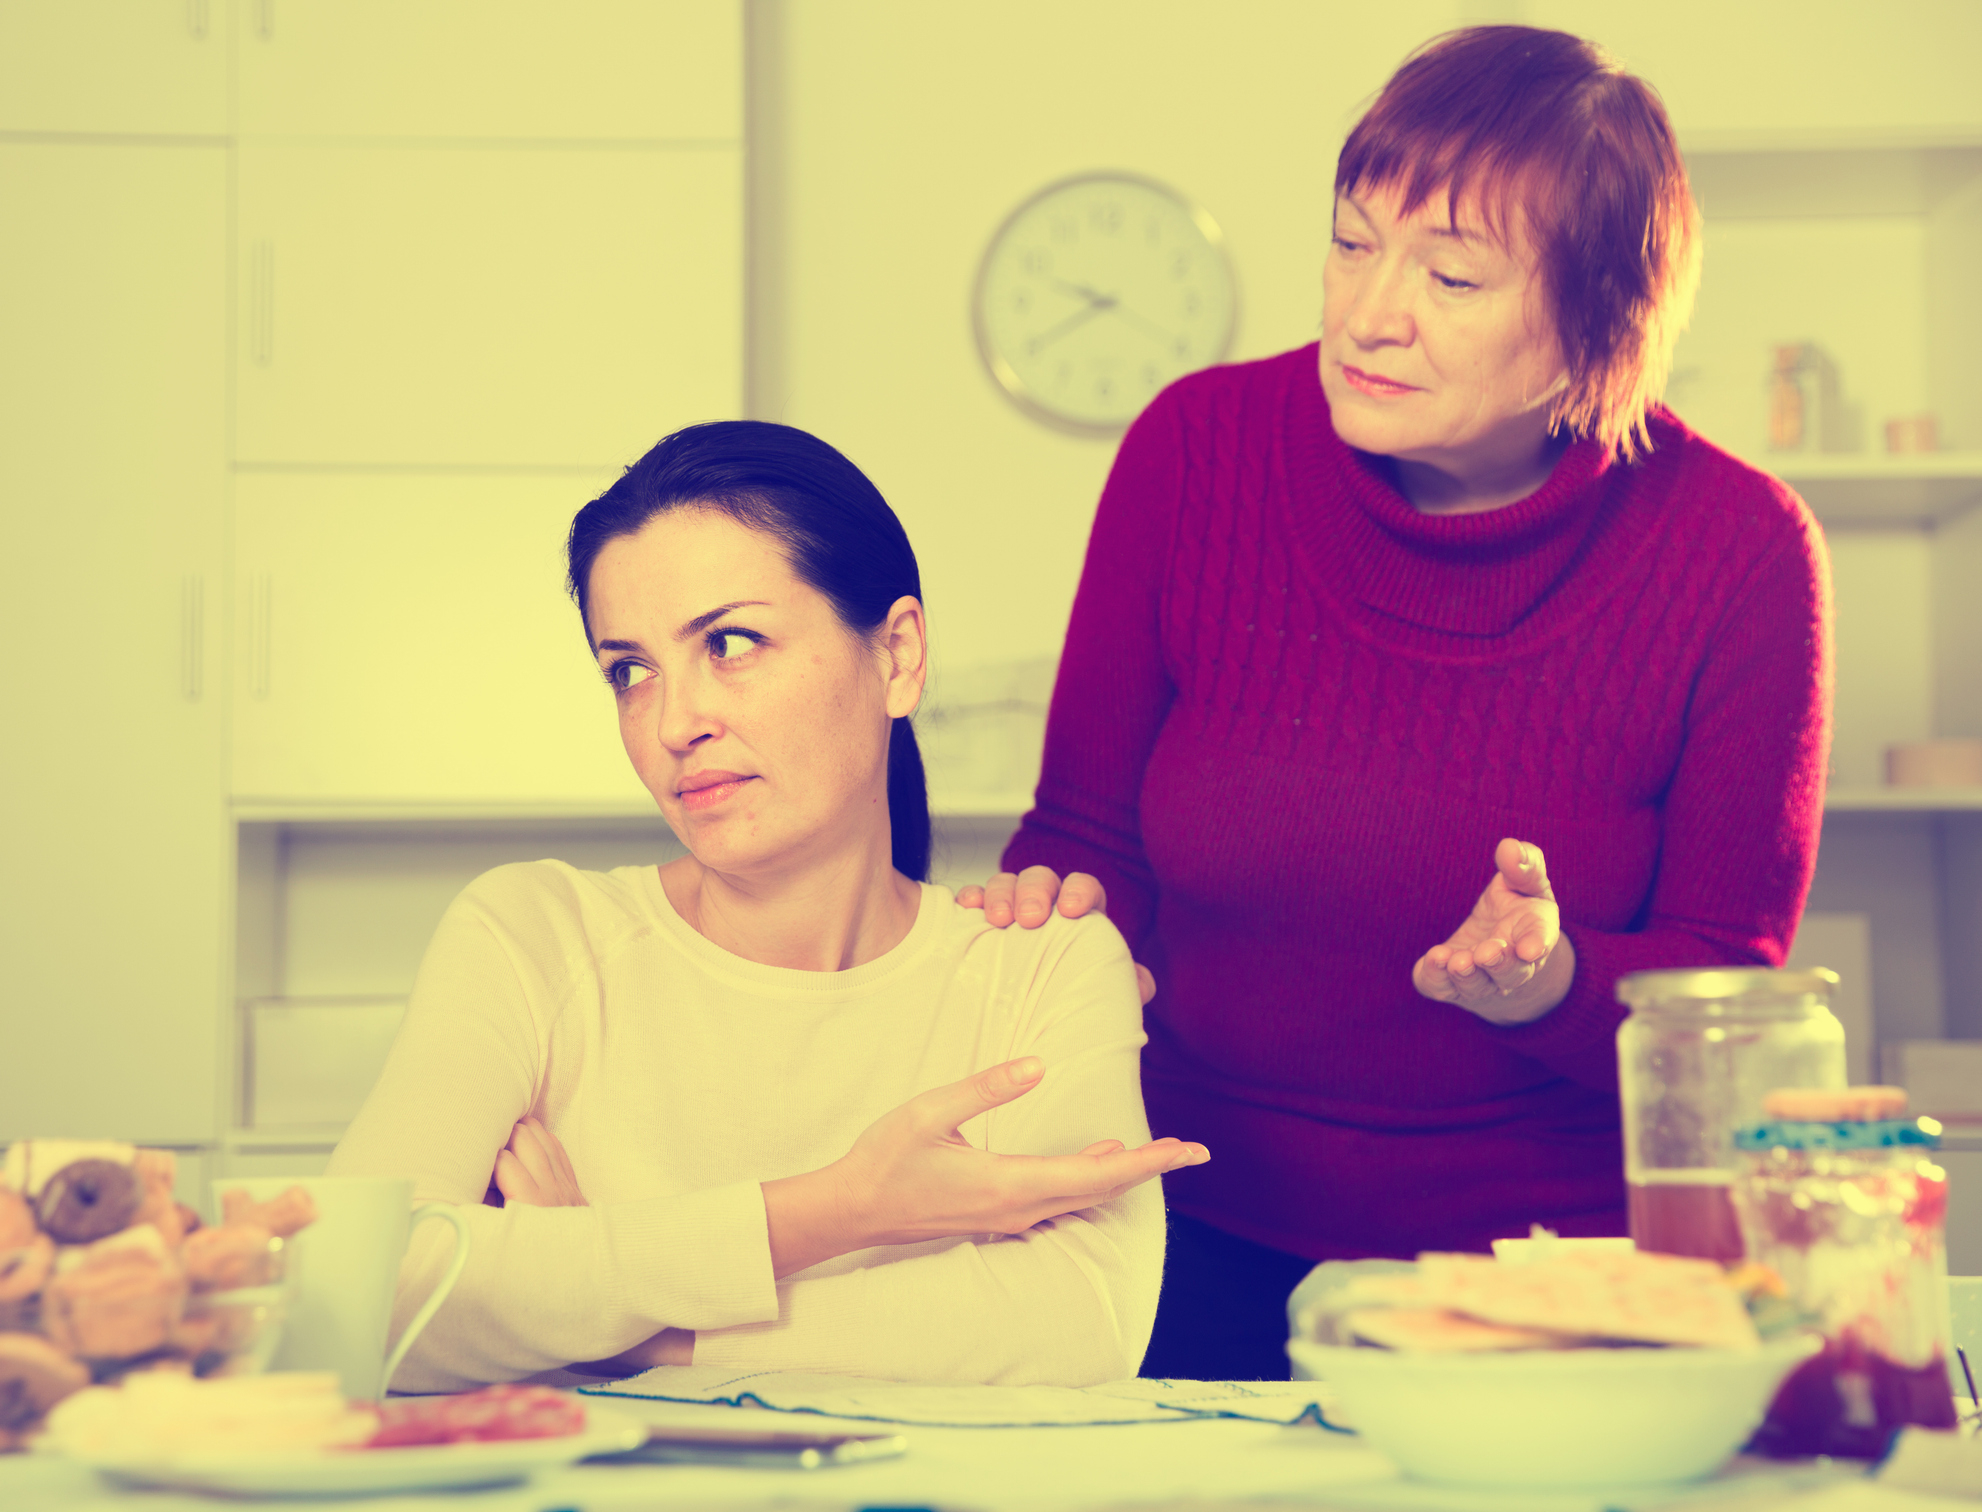 An older woman talks to a younger woman who looks upset at a kitchen table, suggesting a parent and adult child in a discussion